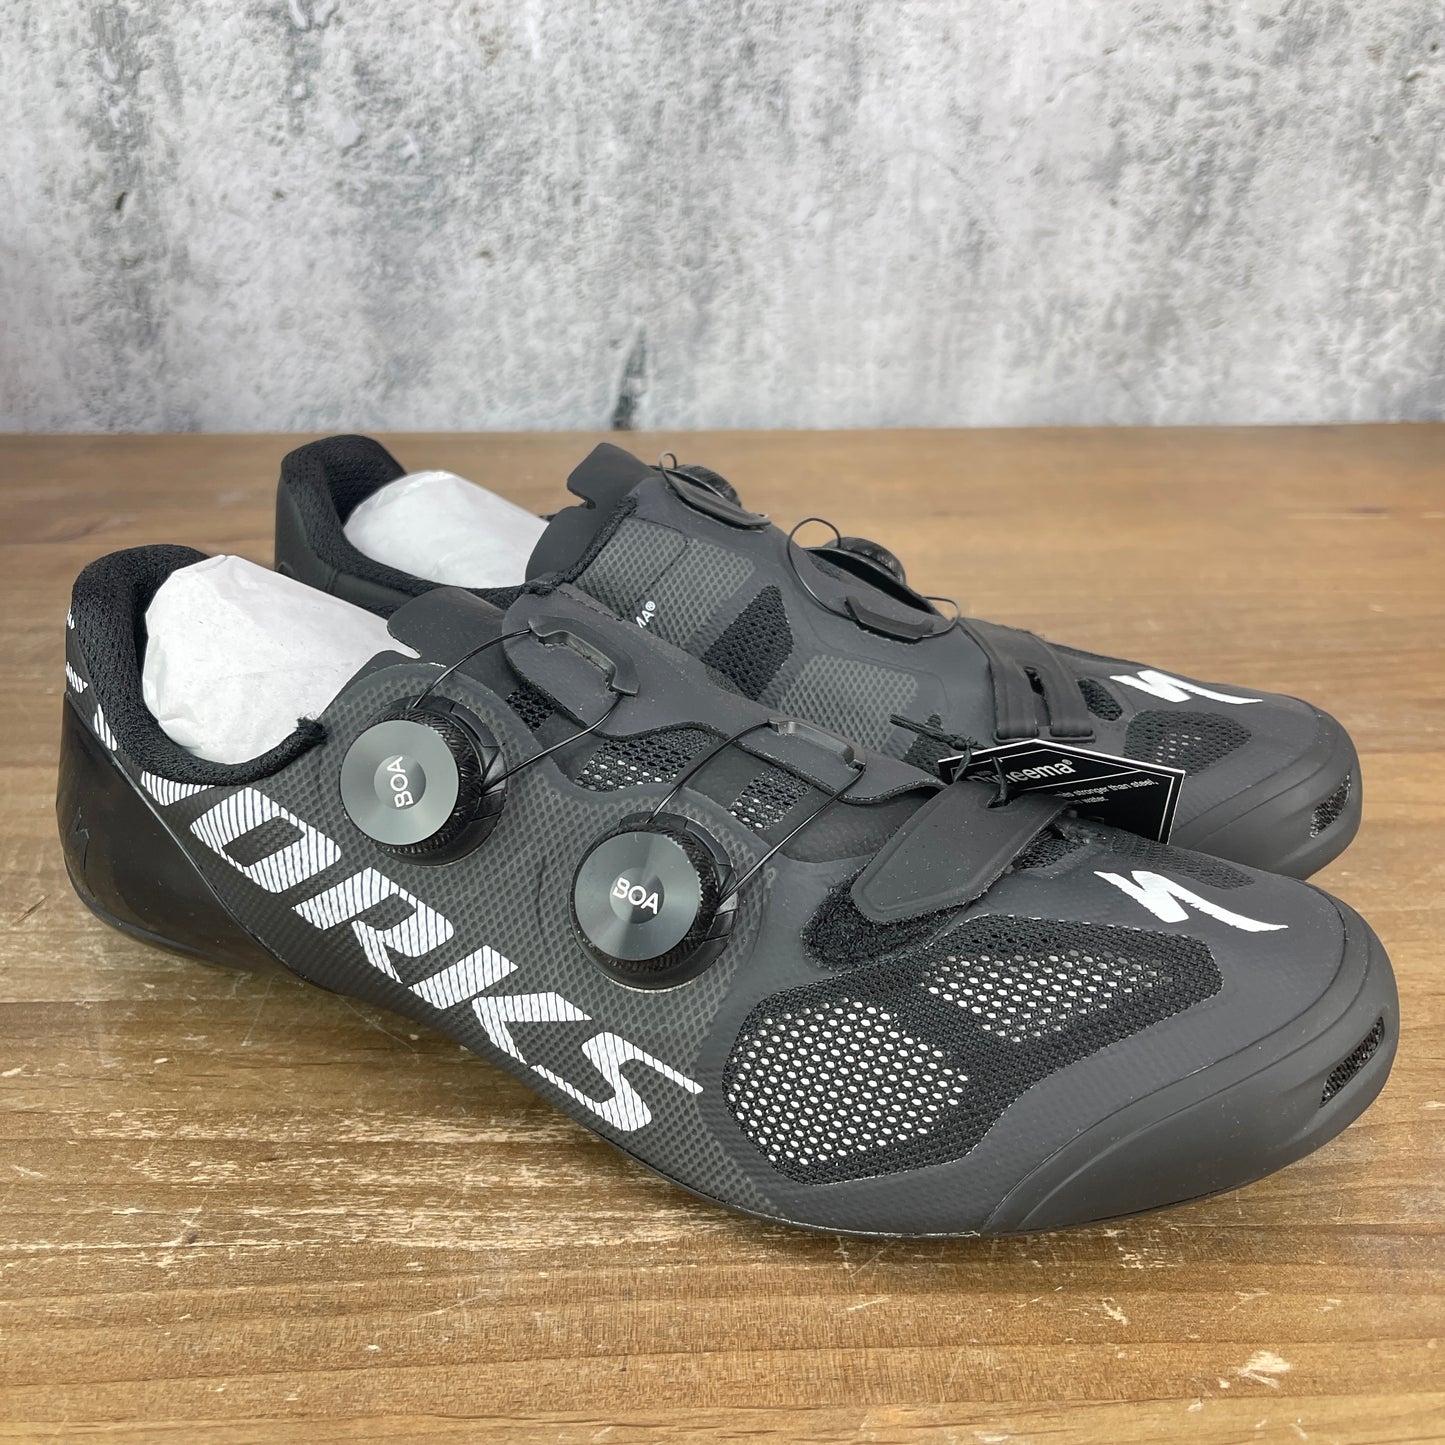 New! Specialized S-Works Vent Men's Various Sizes Road Cycling Shoes 3-Bolt